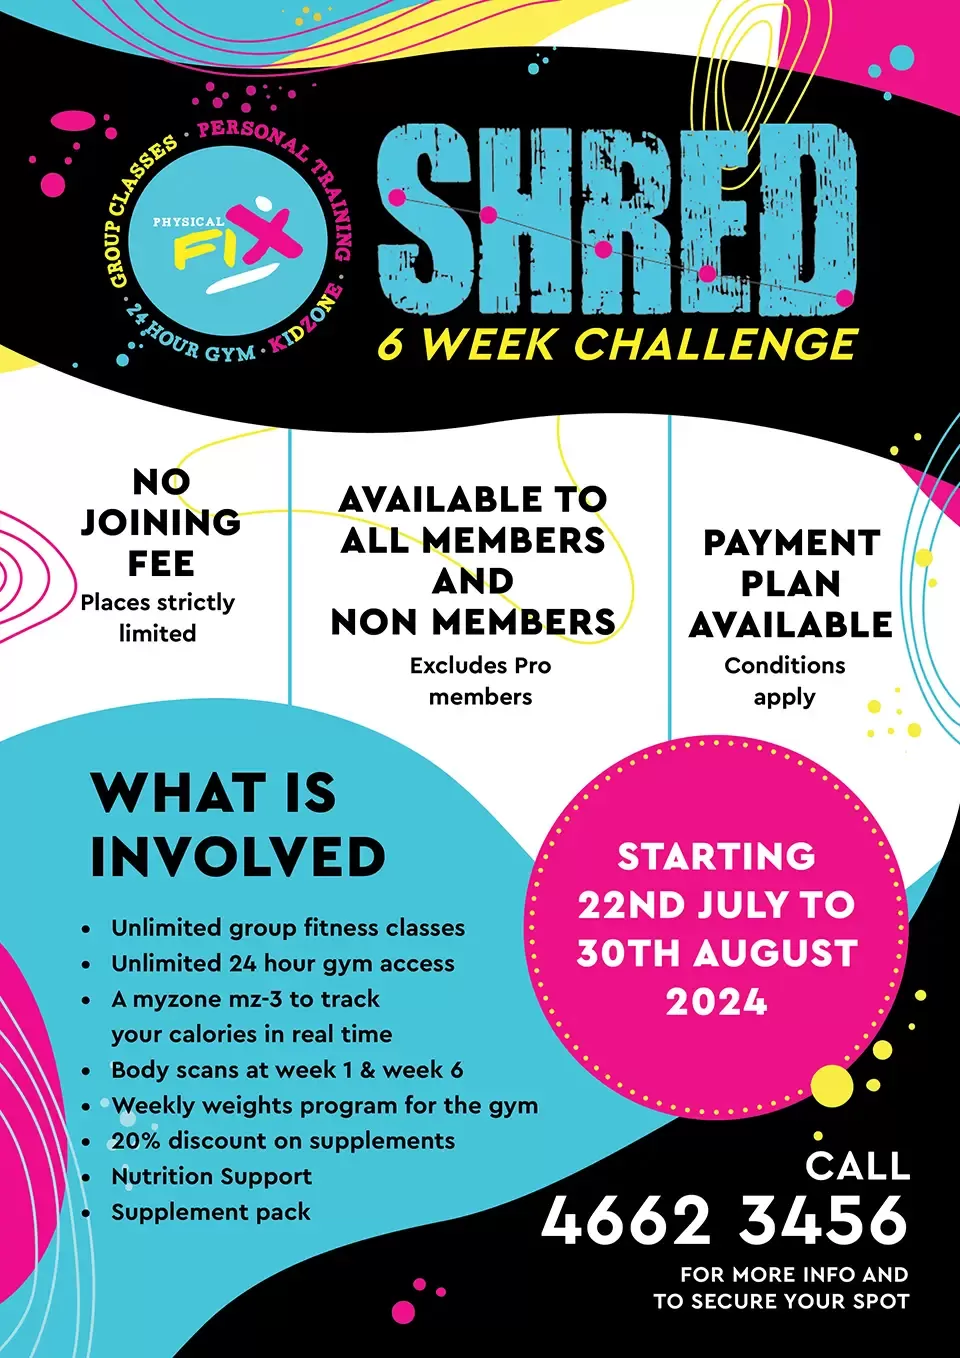 Shred from 29th April to 7th June 2024